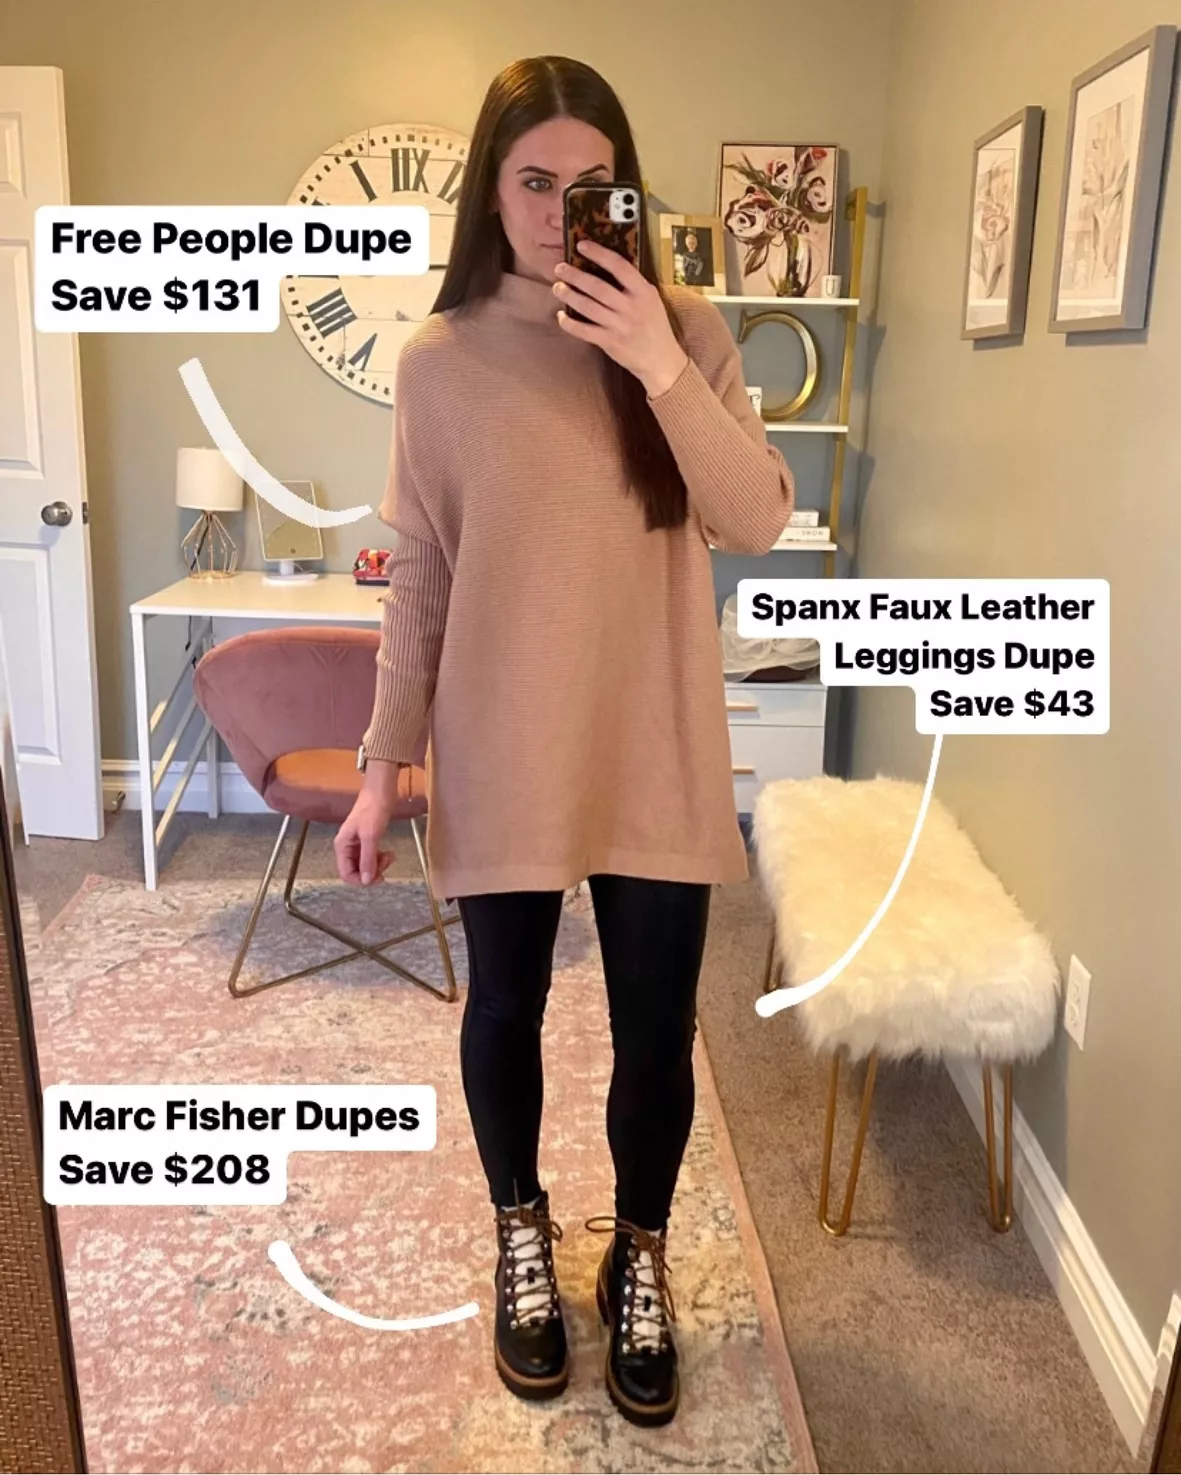 Spanx Faux Leather Leggings Look For Less?